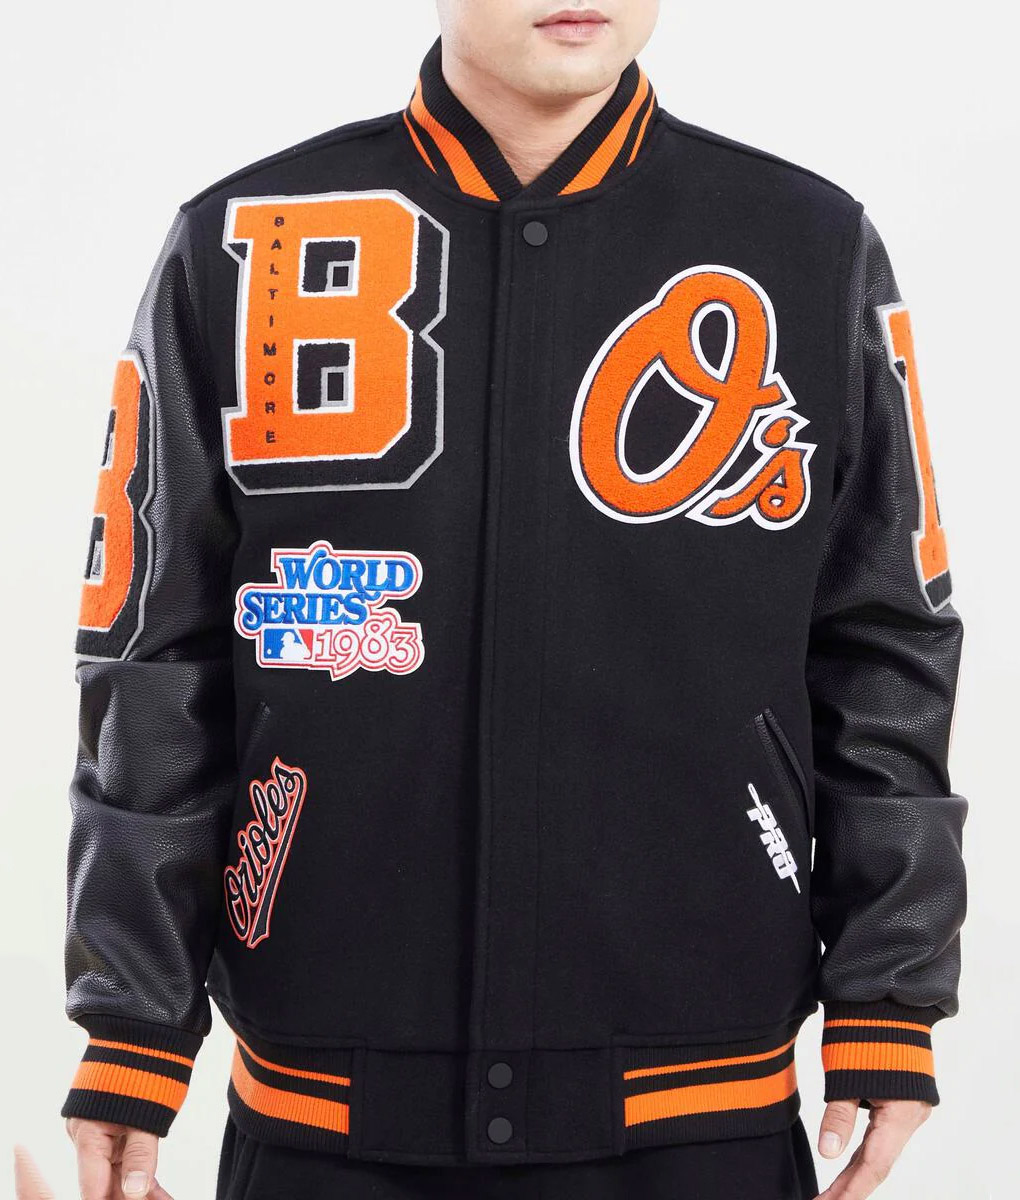 Baltimore Orioles Mashup Wool and Leather Black Jacket